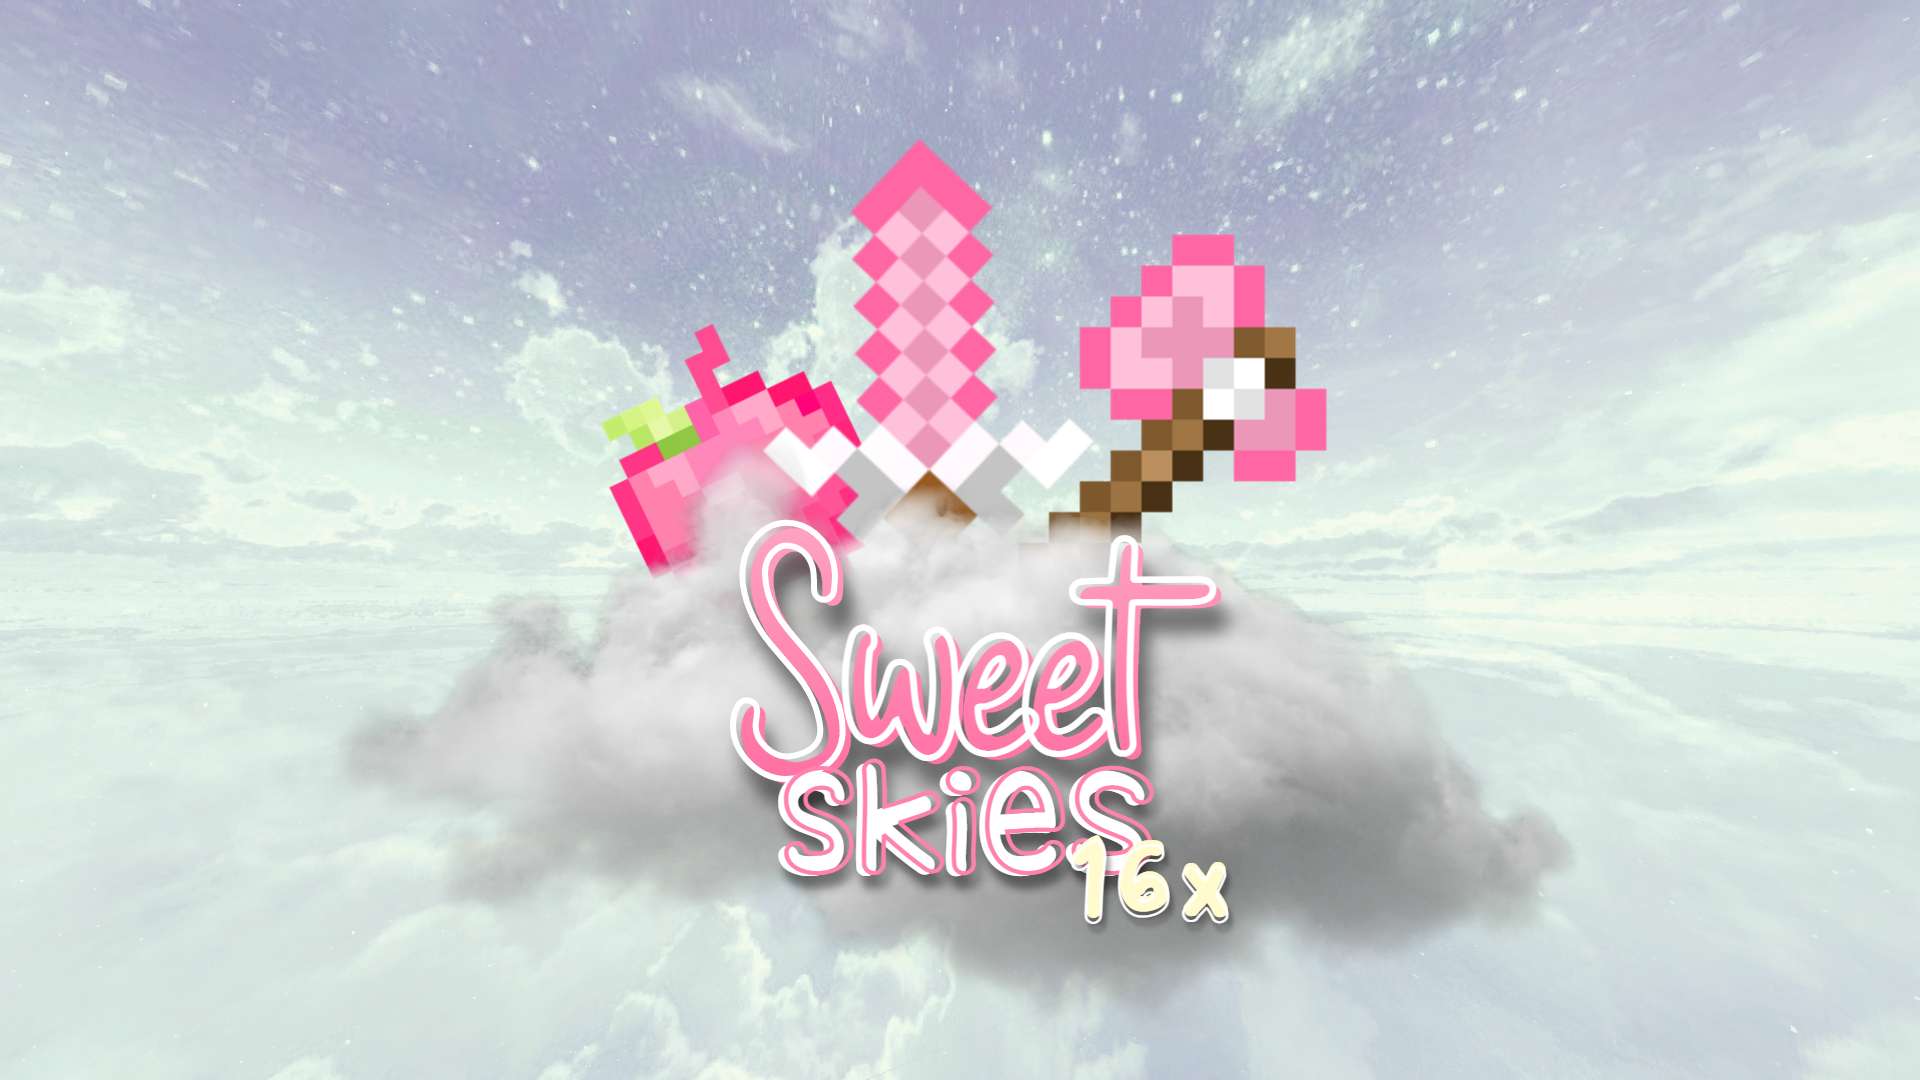 Sweet Skies 16x by _xhelena on PvPRP